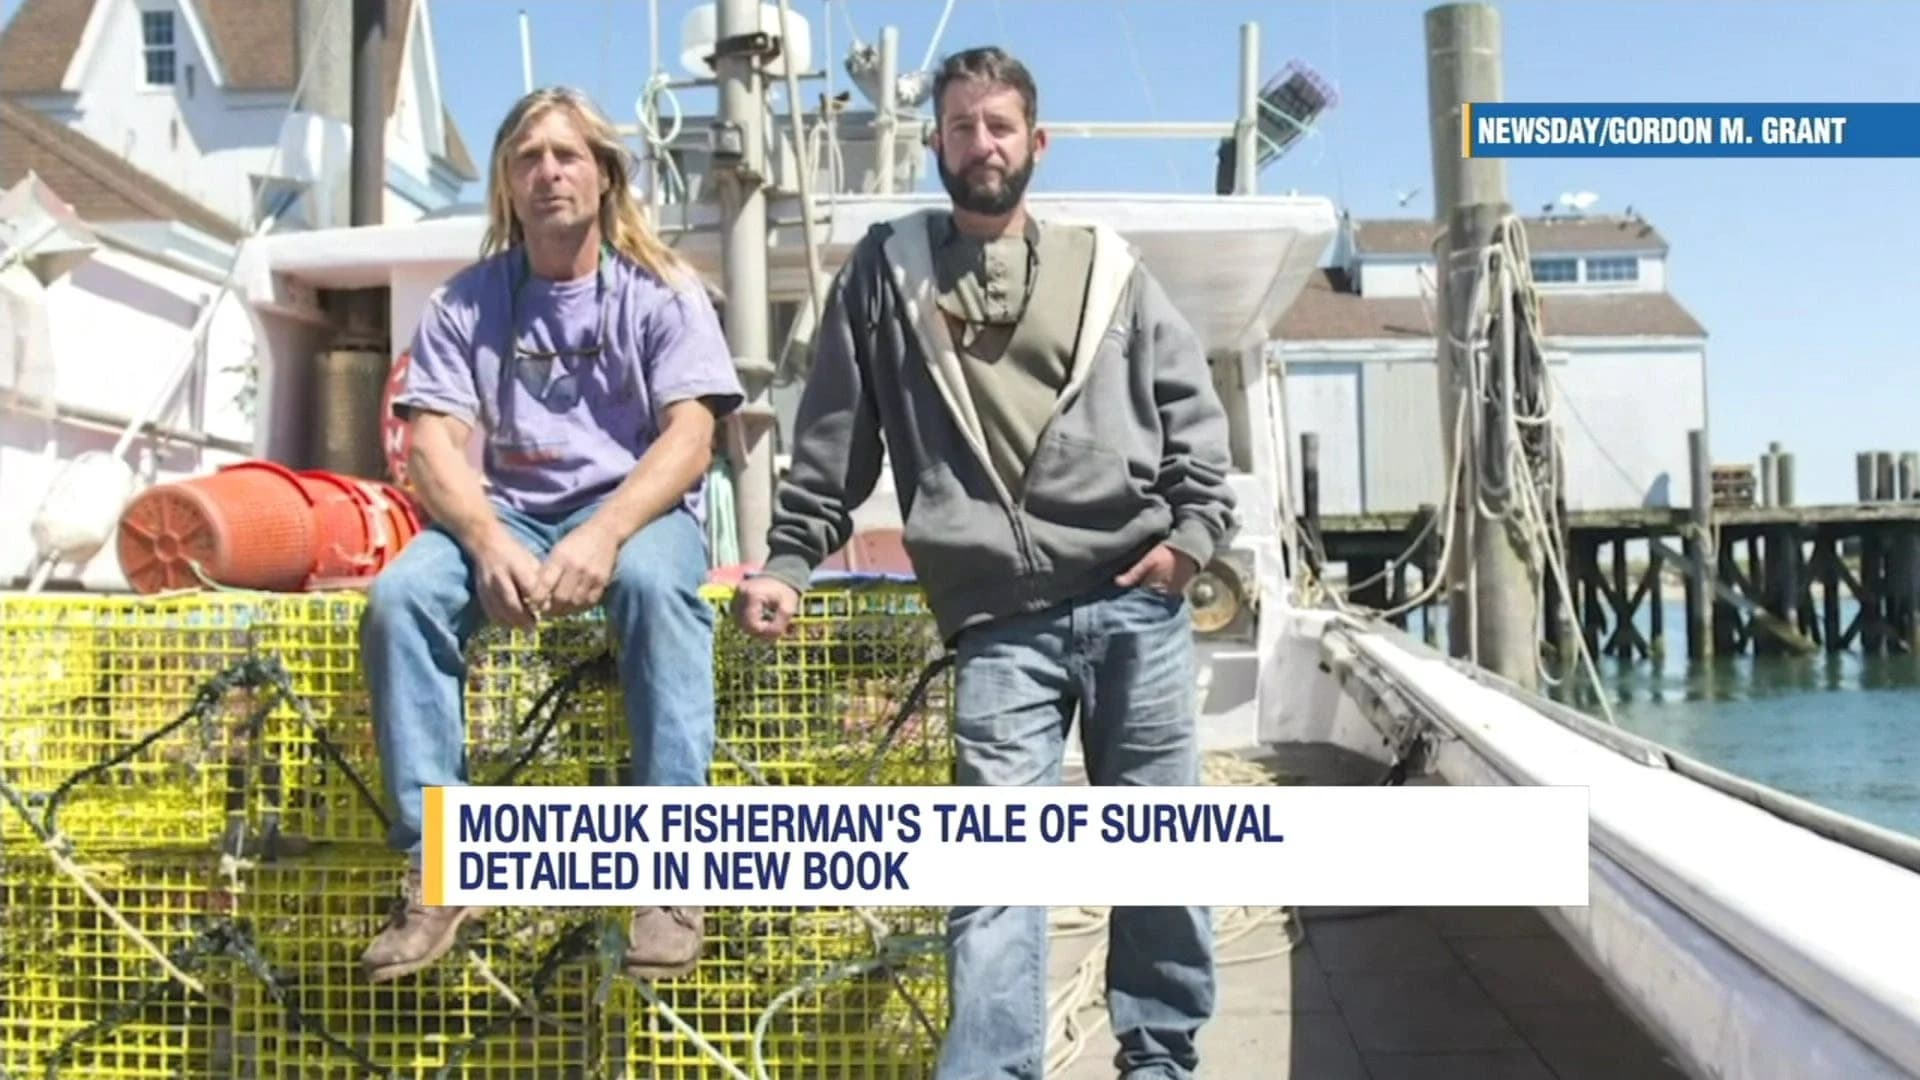 New book chronicles Montauk fisherman's tale of survival